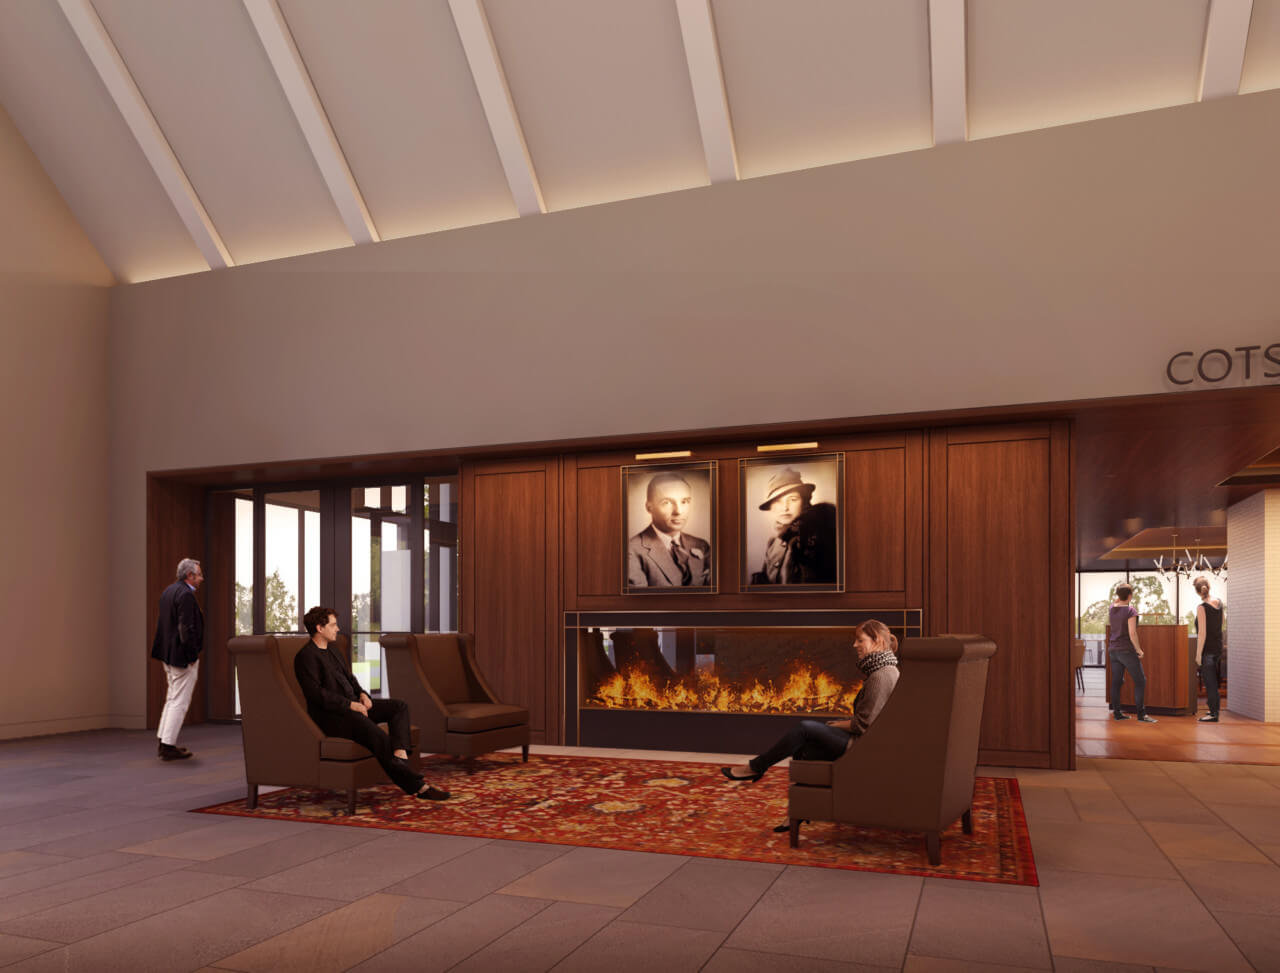 illustration of a lobby area with fireplace